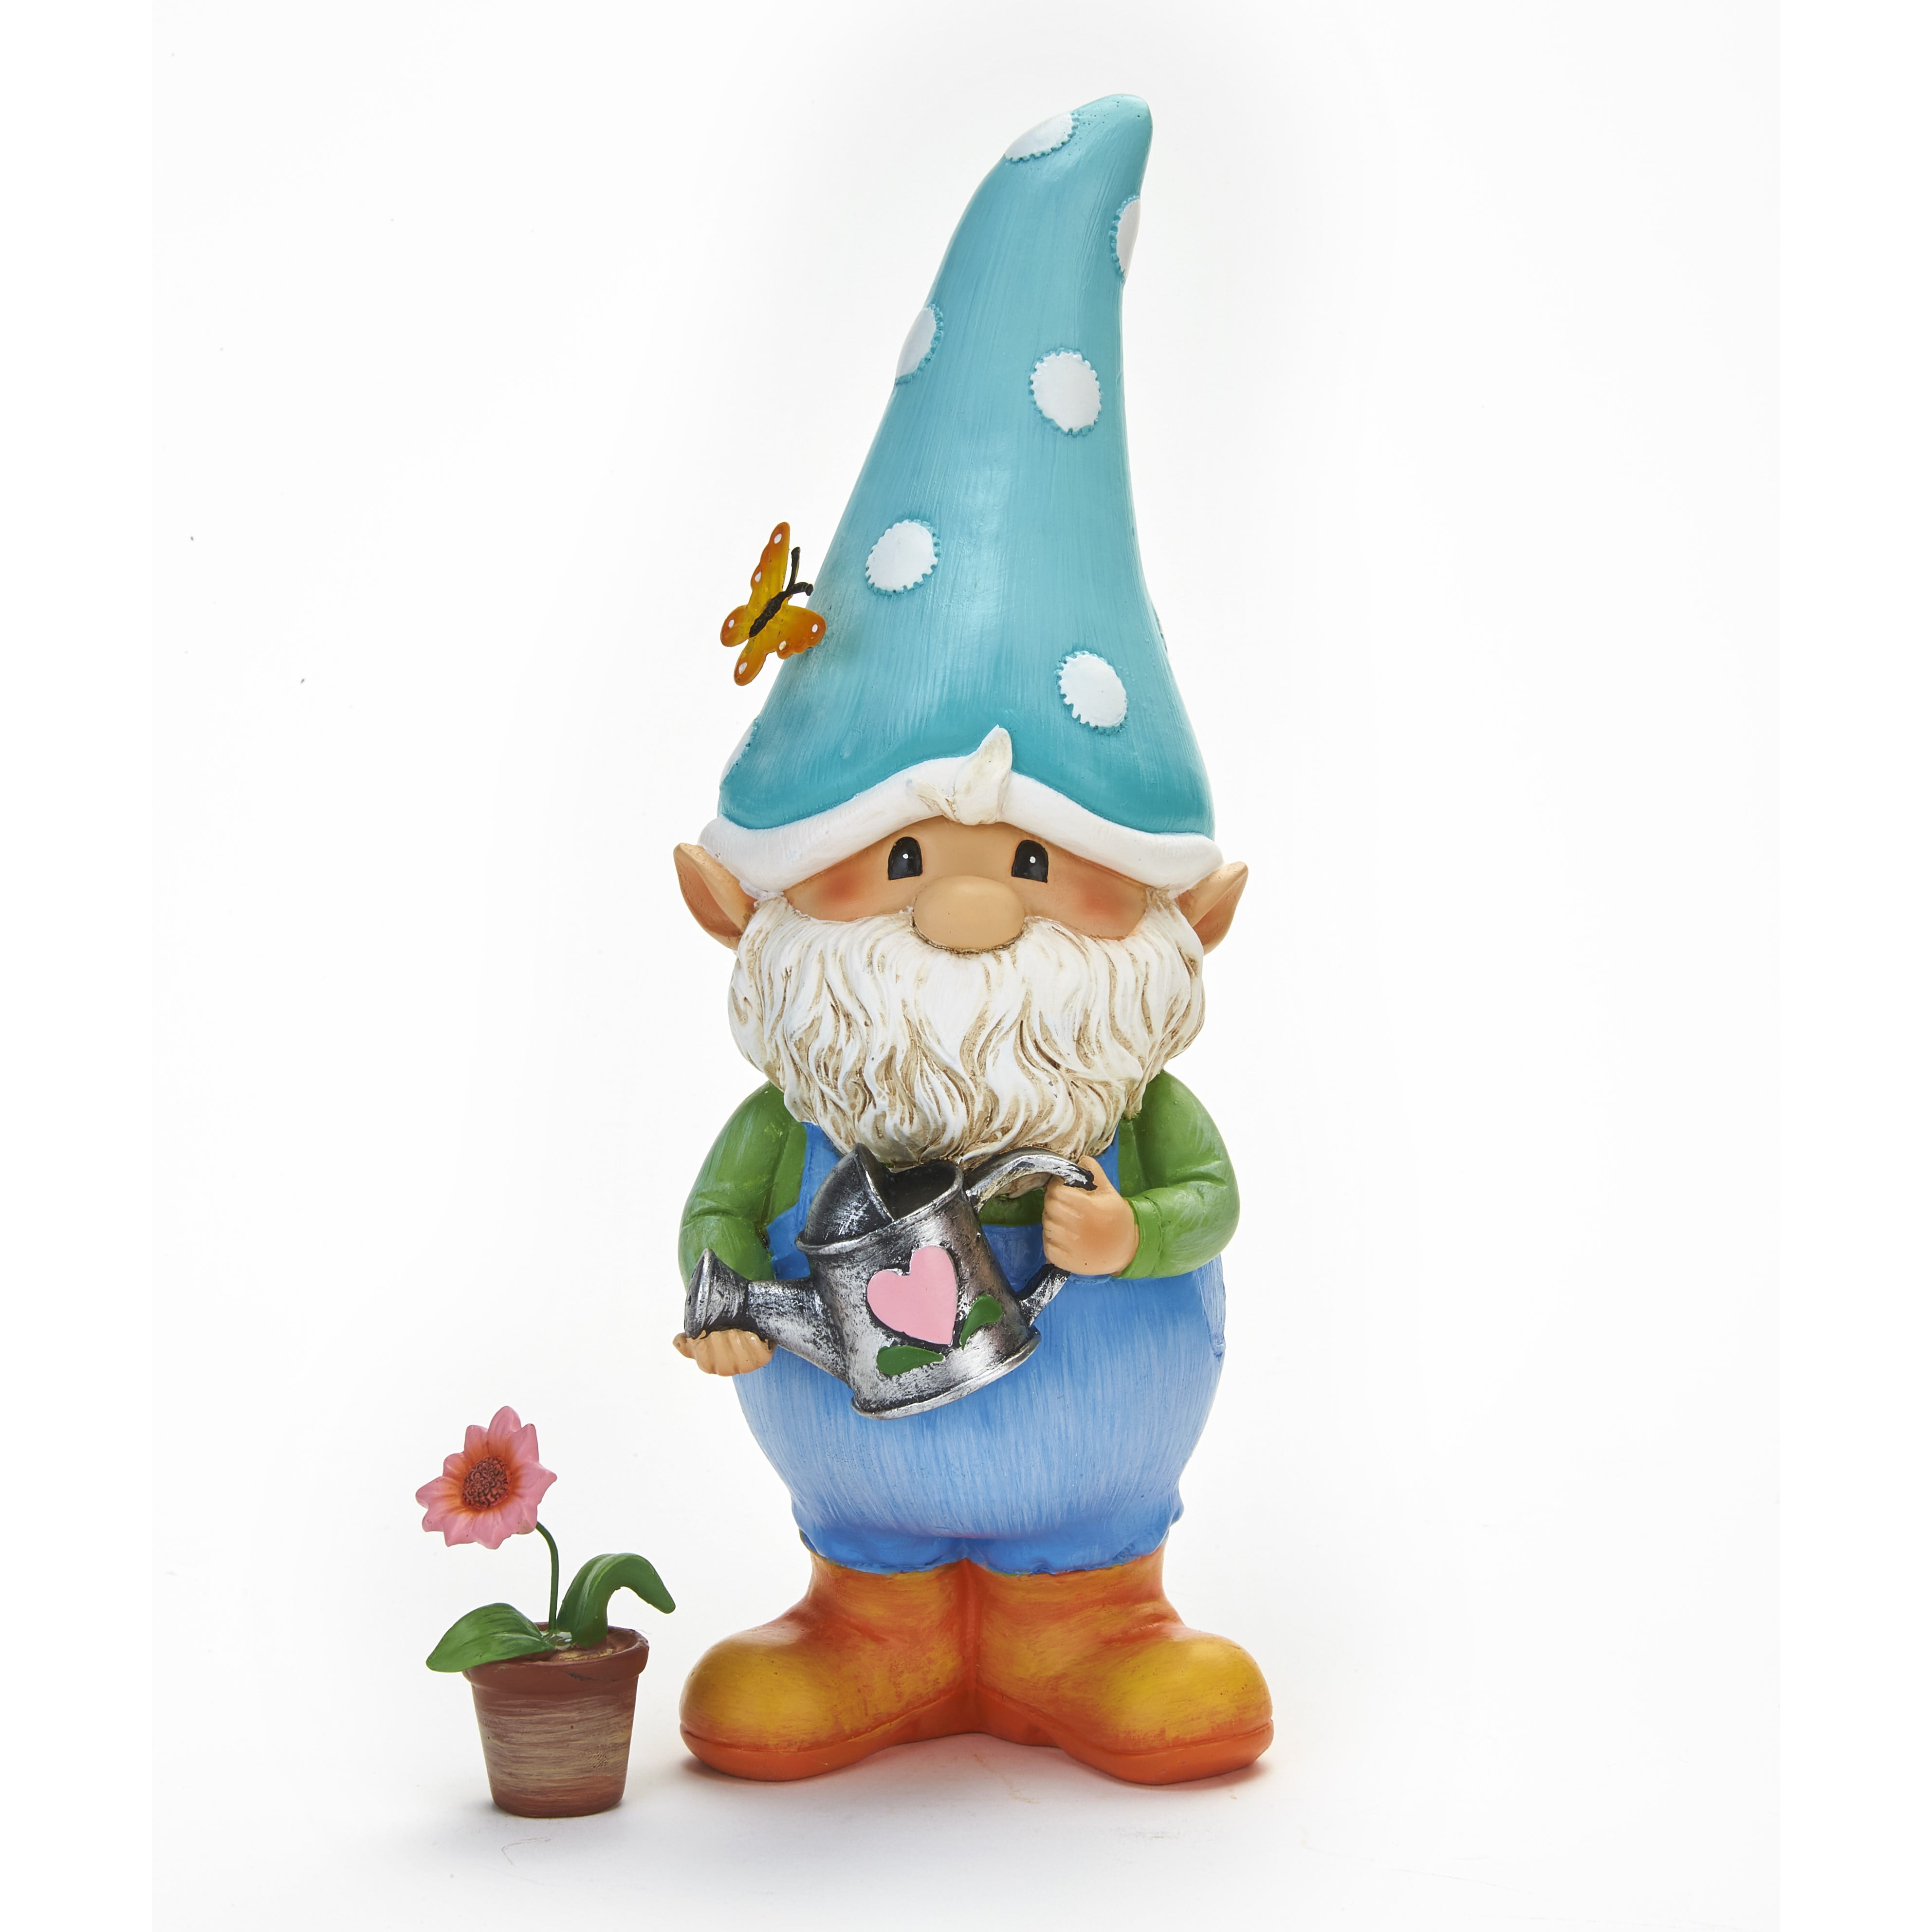 Garden Funny Gnome Ornament Dwarfs Ceramic Stone Effect Tall Outdoor or Indoor